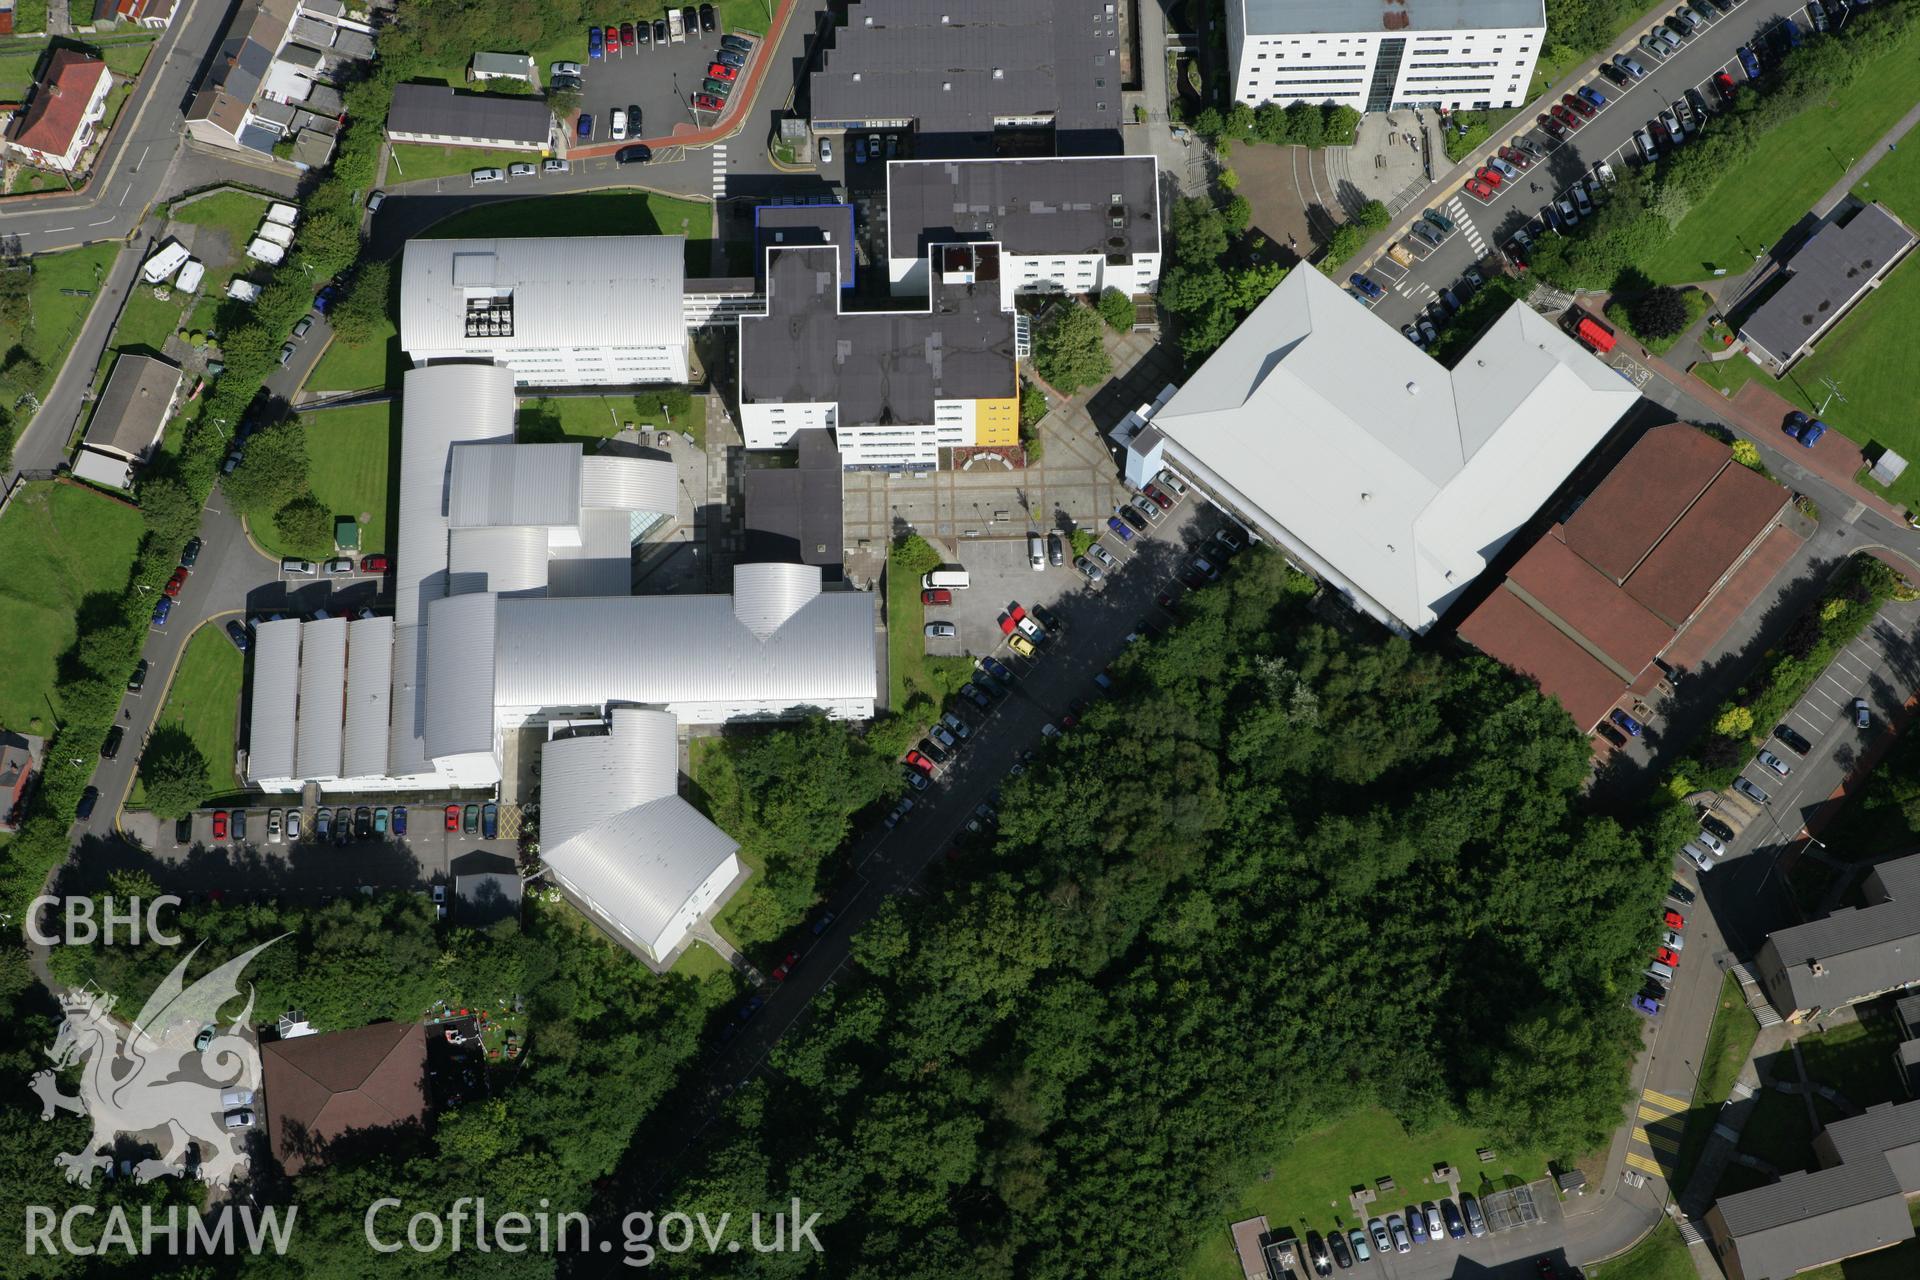 RCAHMW colour oblique aerial photograph of University of Glamorgan's Pontypridd Campus at Treforest. Taken on 30 July 2007 by Toby Driver